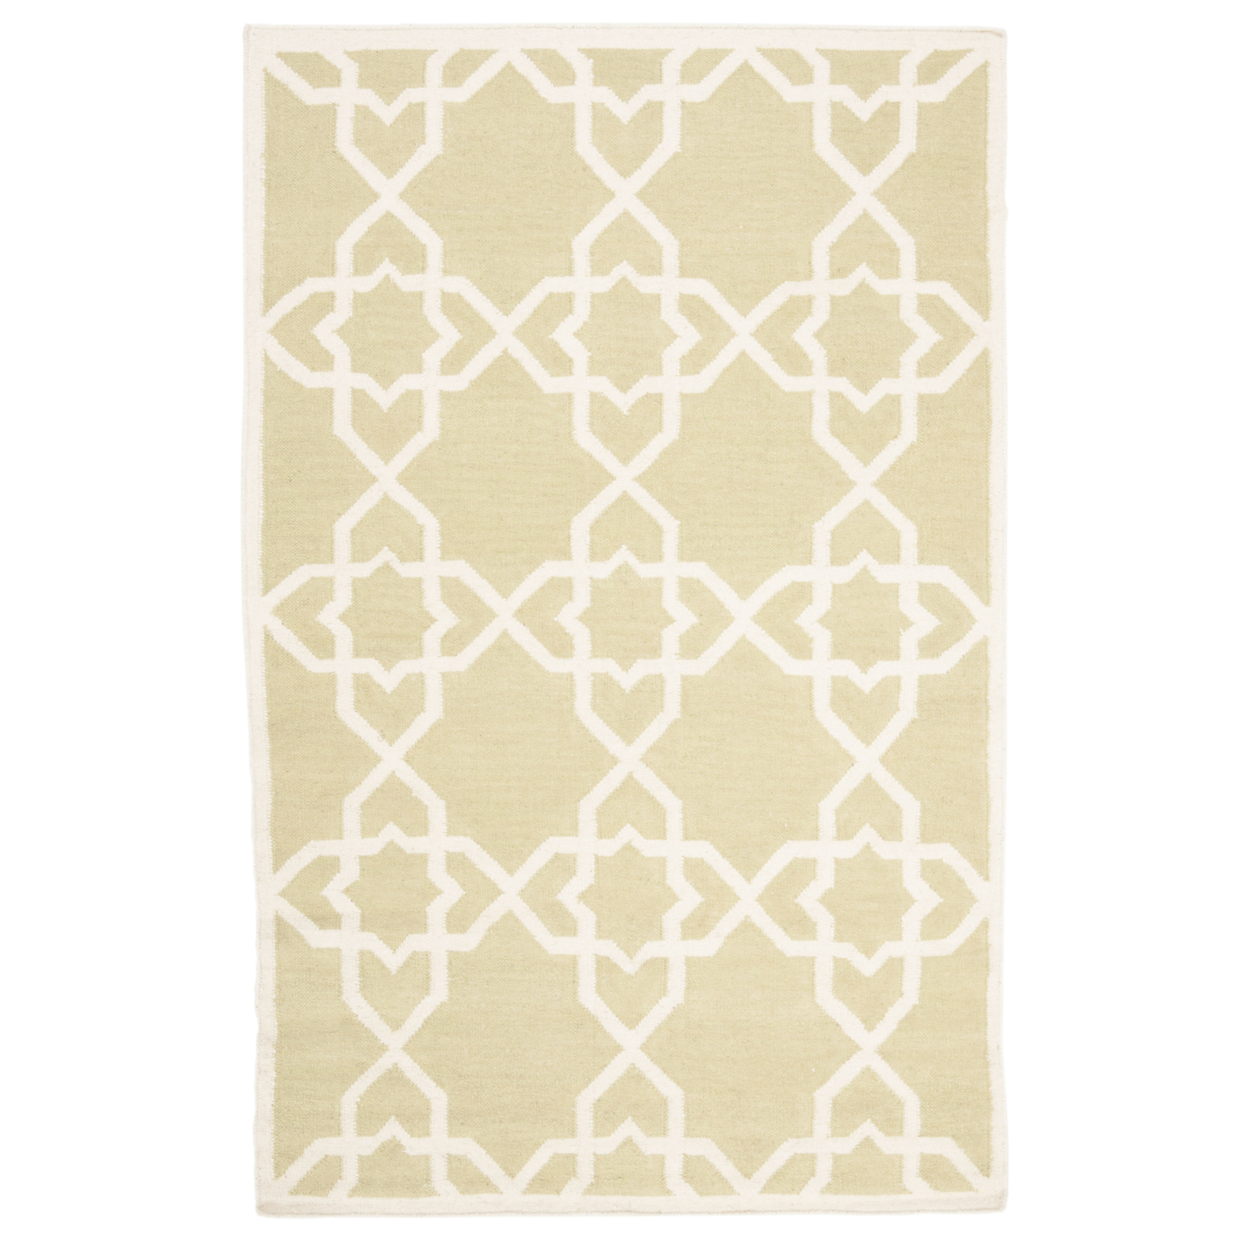 SAFAVIEH Dhurries DHU548A Handwoven Olive / Ivory Rug - 3' X 5'